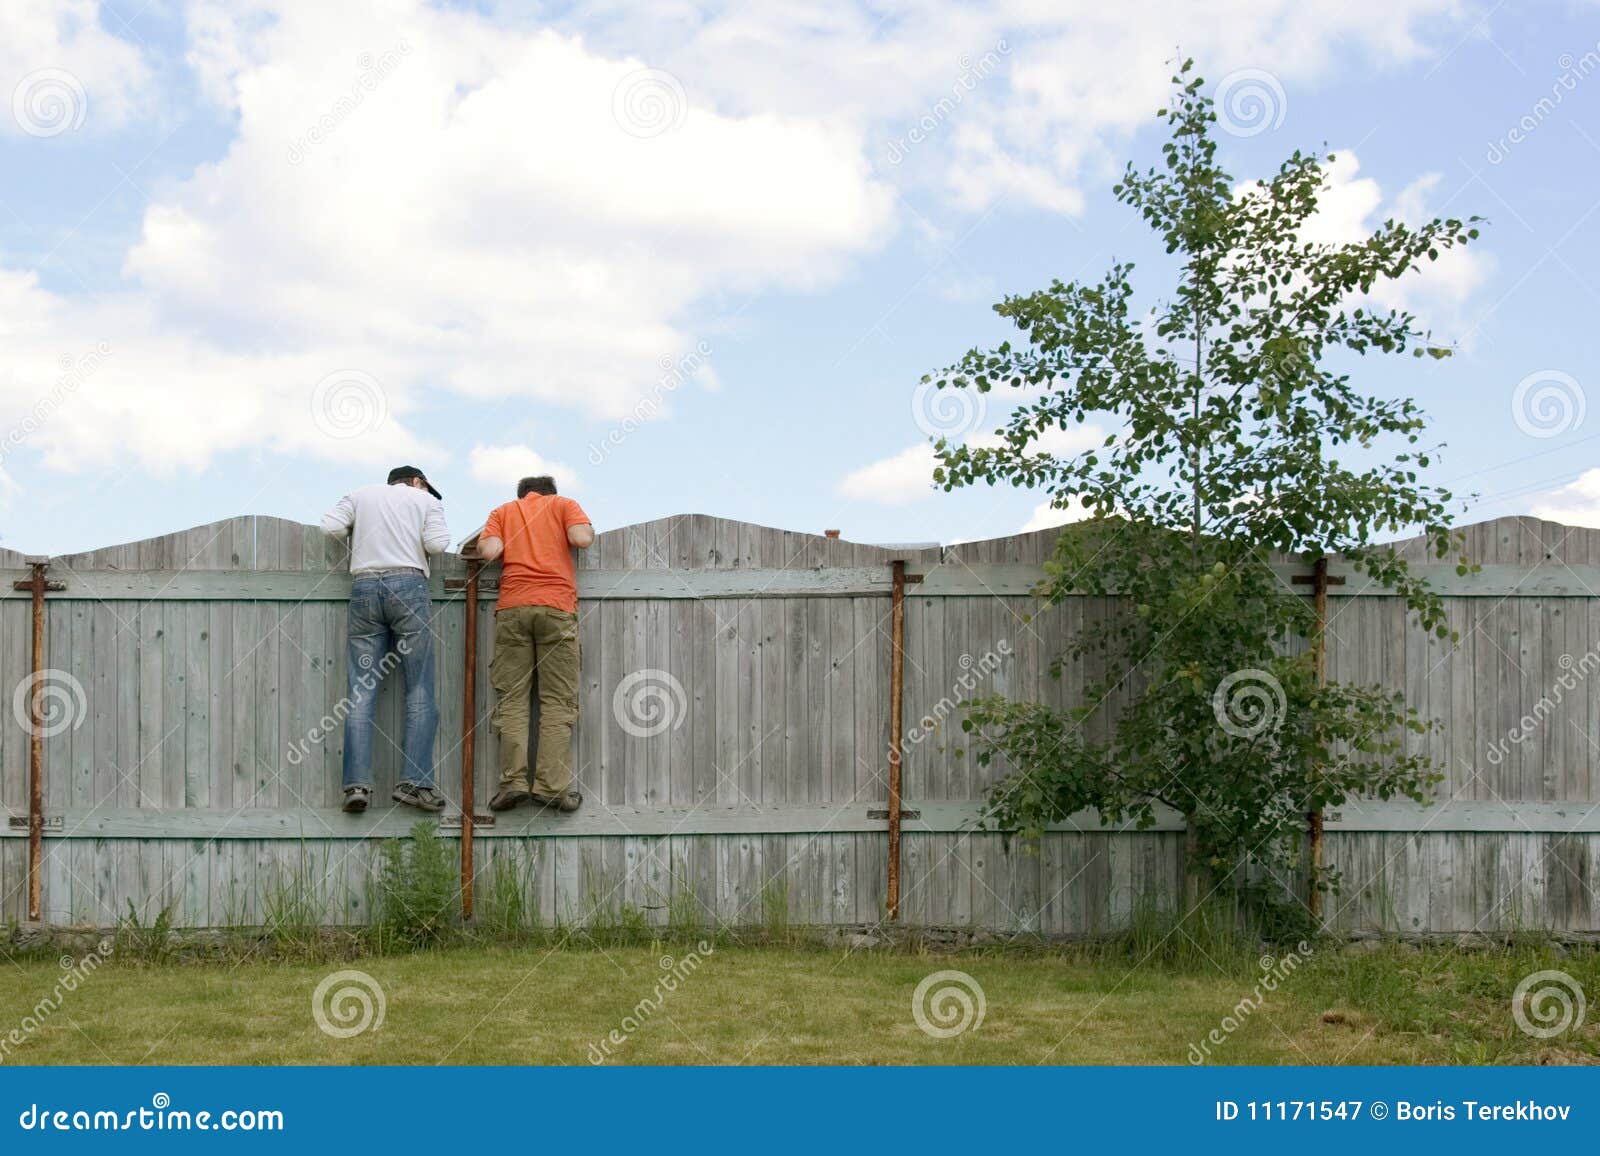 two boys on the fence looking for smth